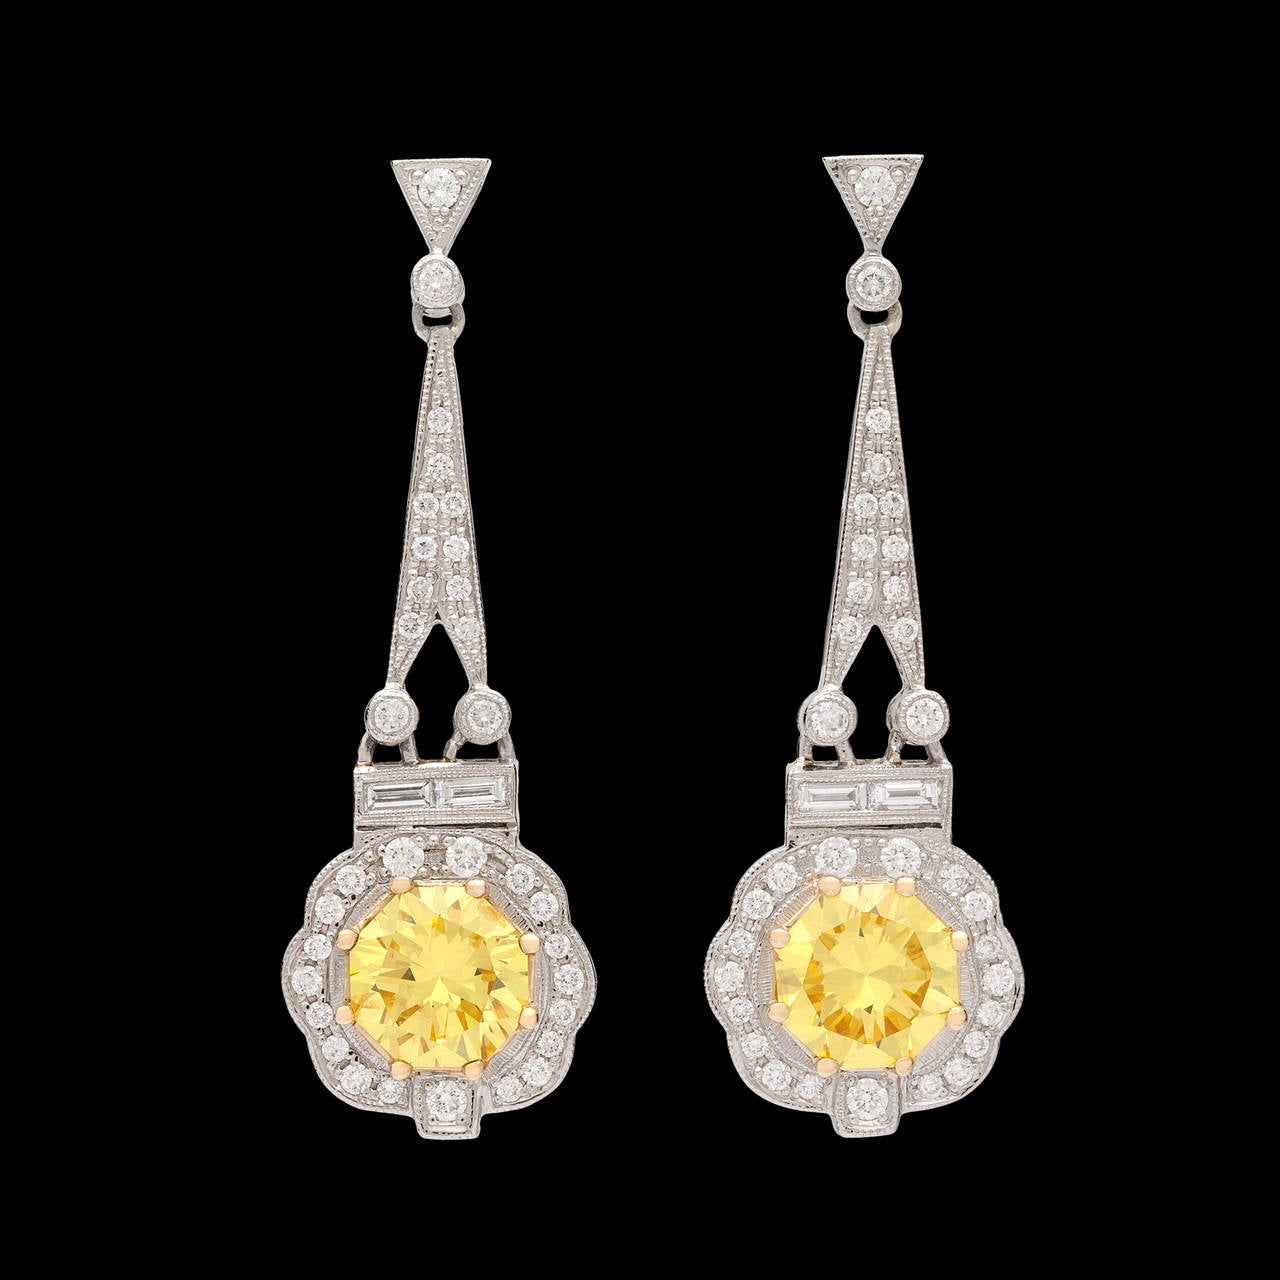 Stunning GIA Natural Fancy Intense Yellow Diamond Earrings in Deco Style Platinum and 18Kt Yellow Gold Settings. The two evenly colored yellow diamonds are shaped in a unique octagonal modified brilliant cut. The fancy intense yellow diamonds total